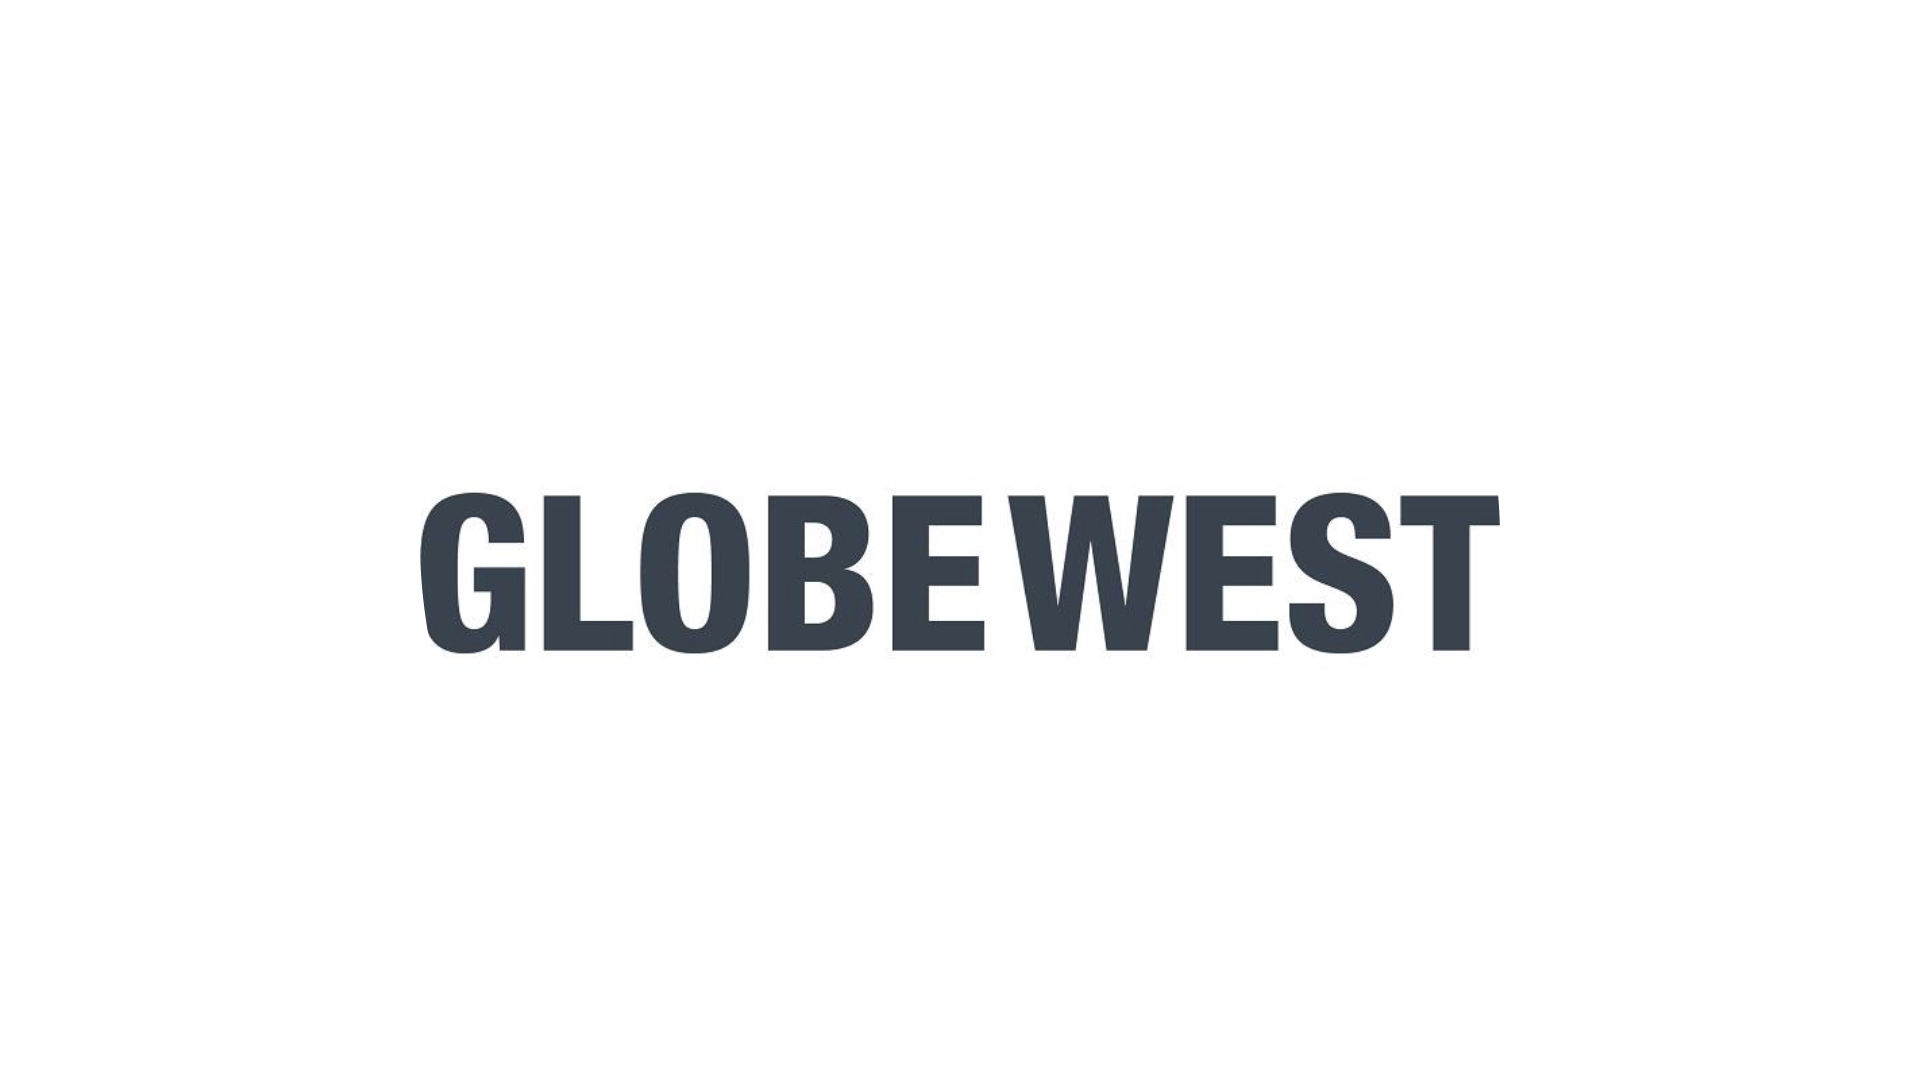 Get the Coastal style by shopping with Globewest